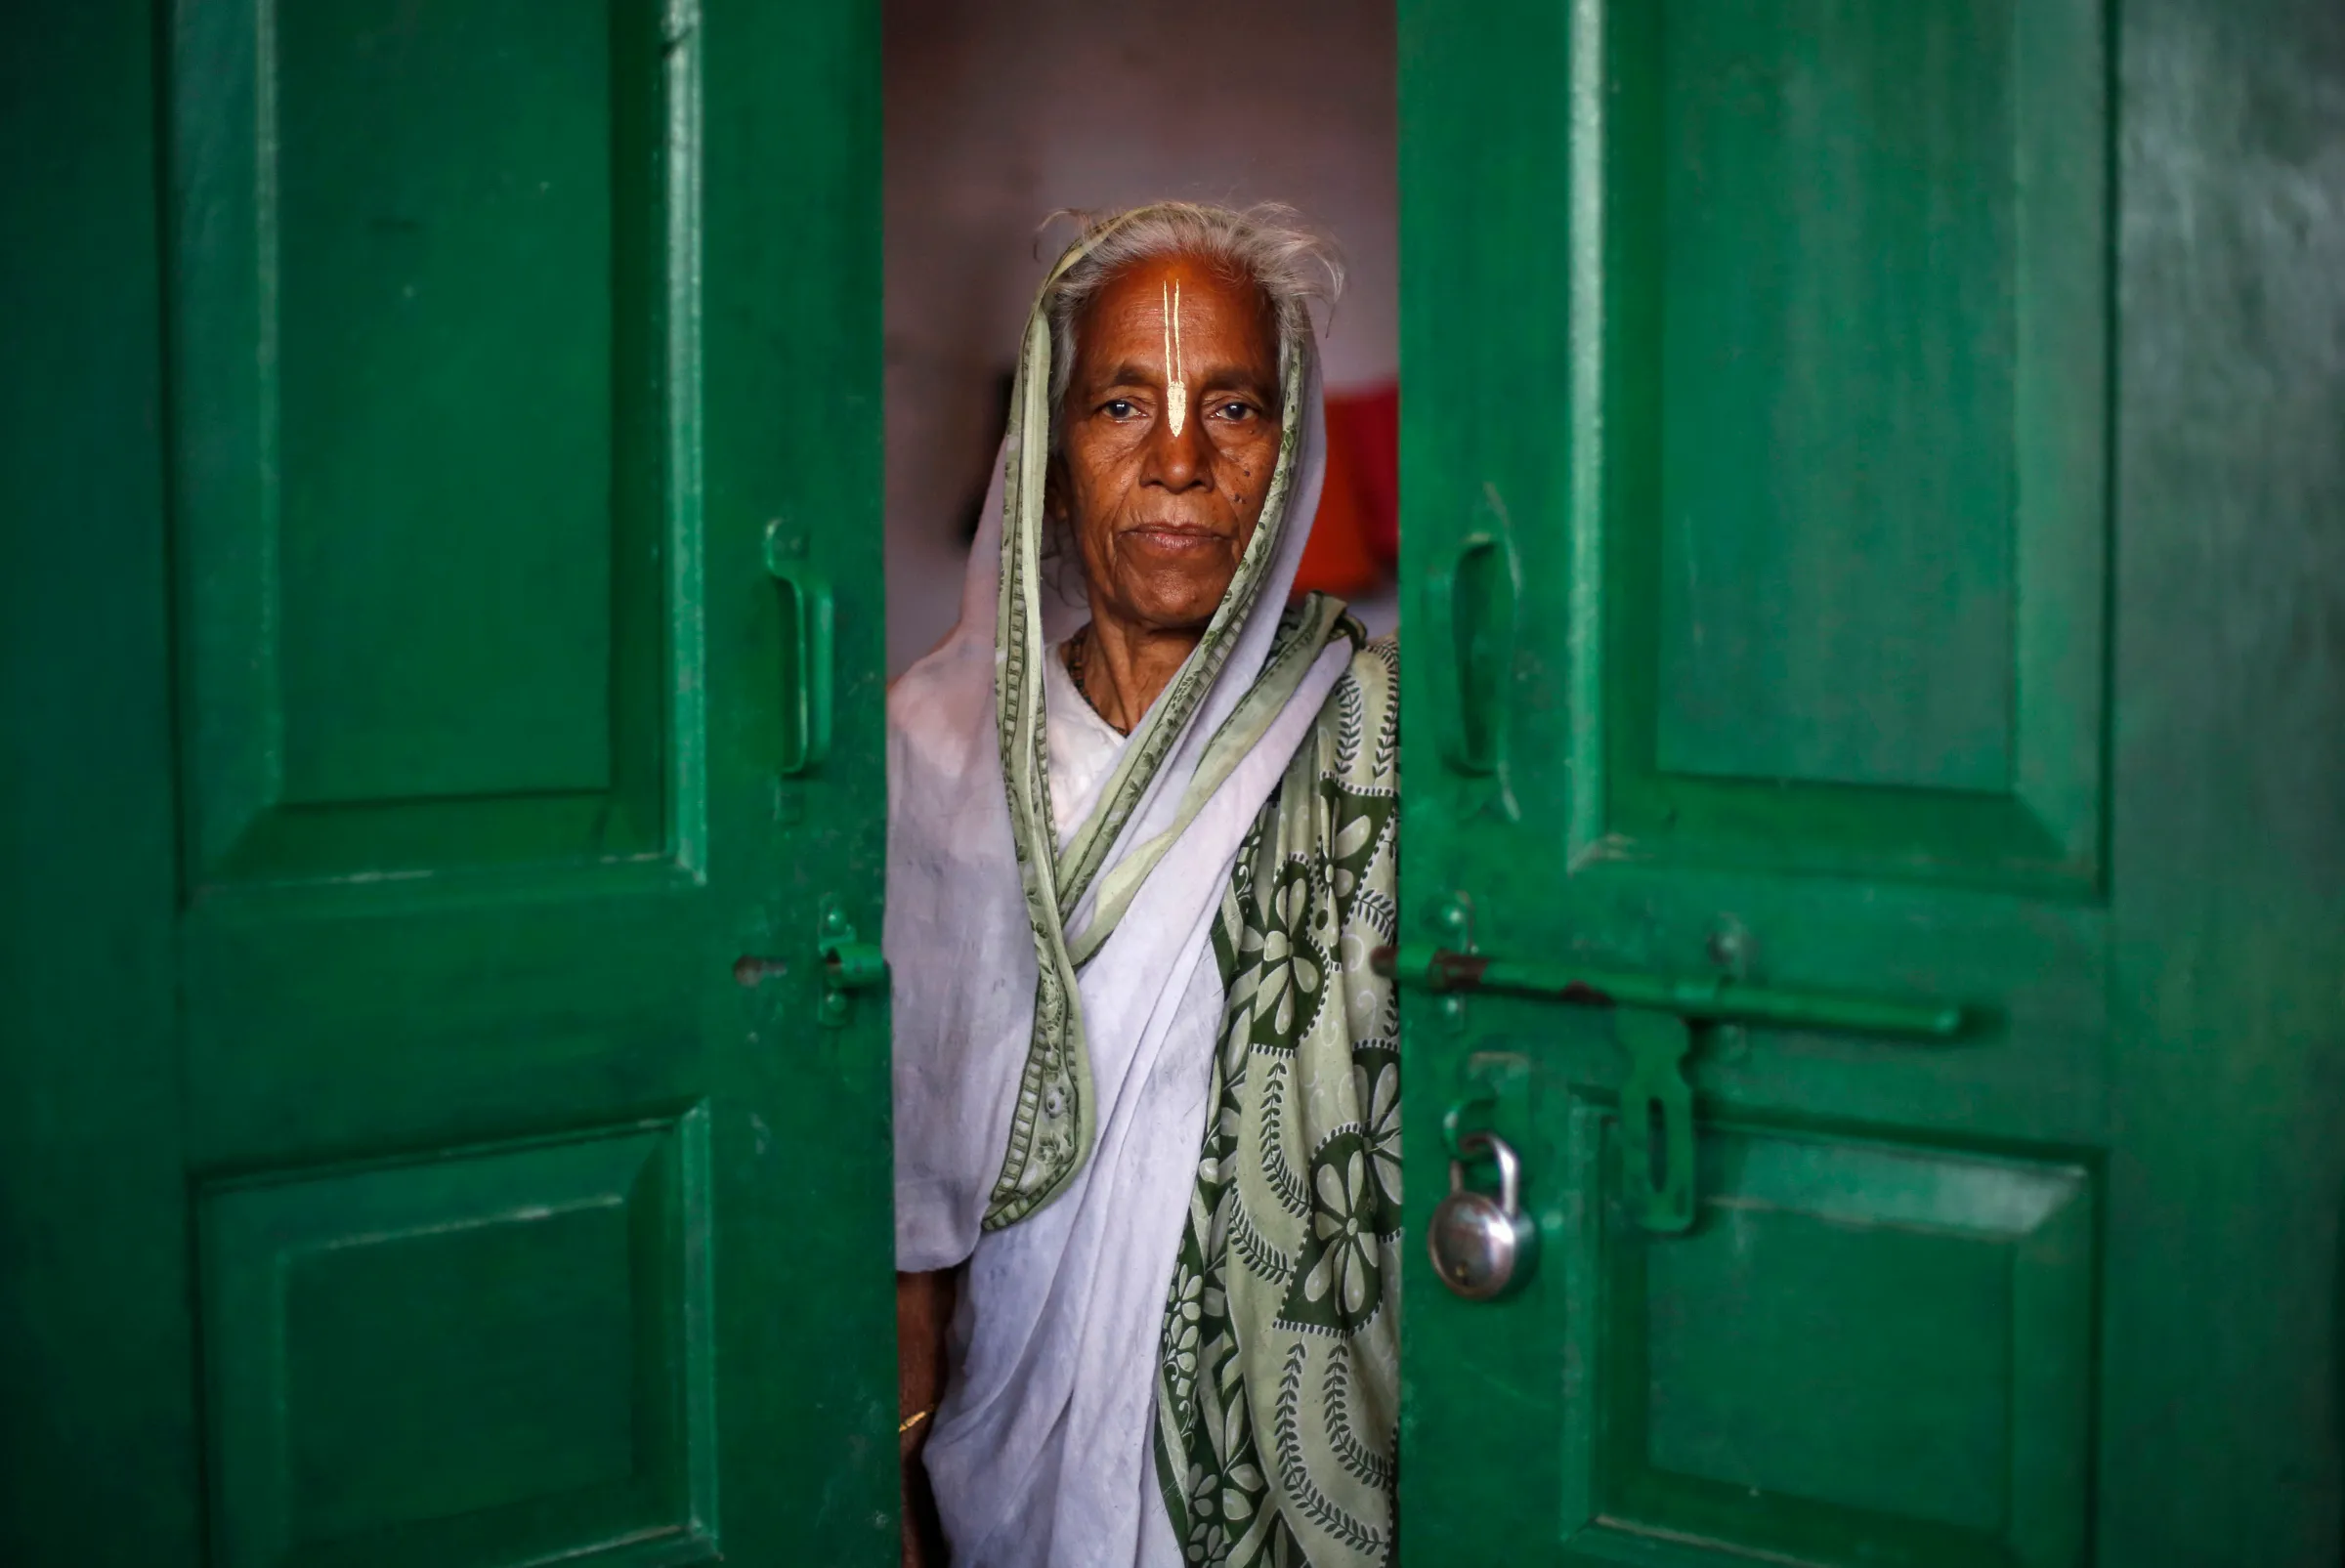 A widow poses for a picture inside her room at the Meera Sahavagini ashram in the pilgrimage town of Vrindavan in the northern Indian state of Uttar Pradesh March 6, 2013.